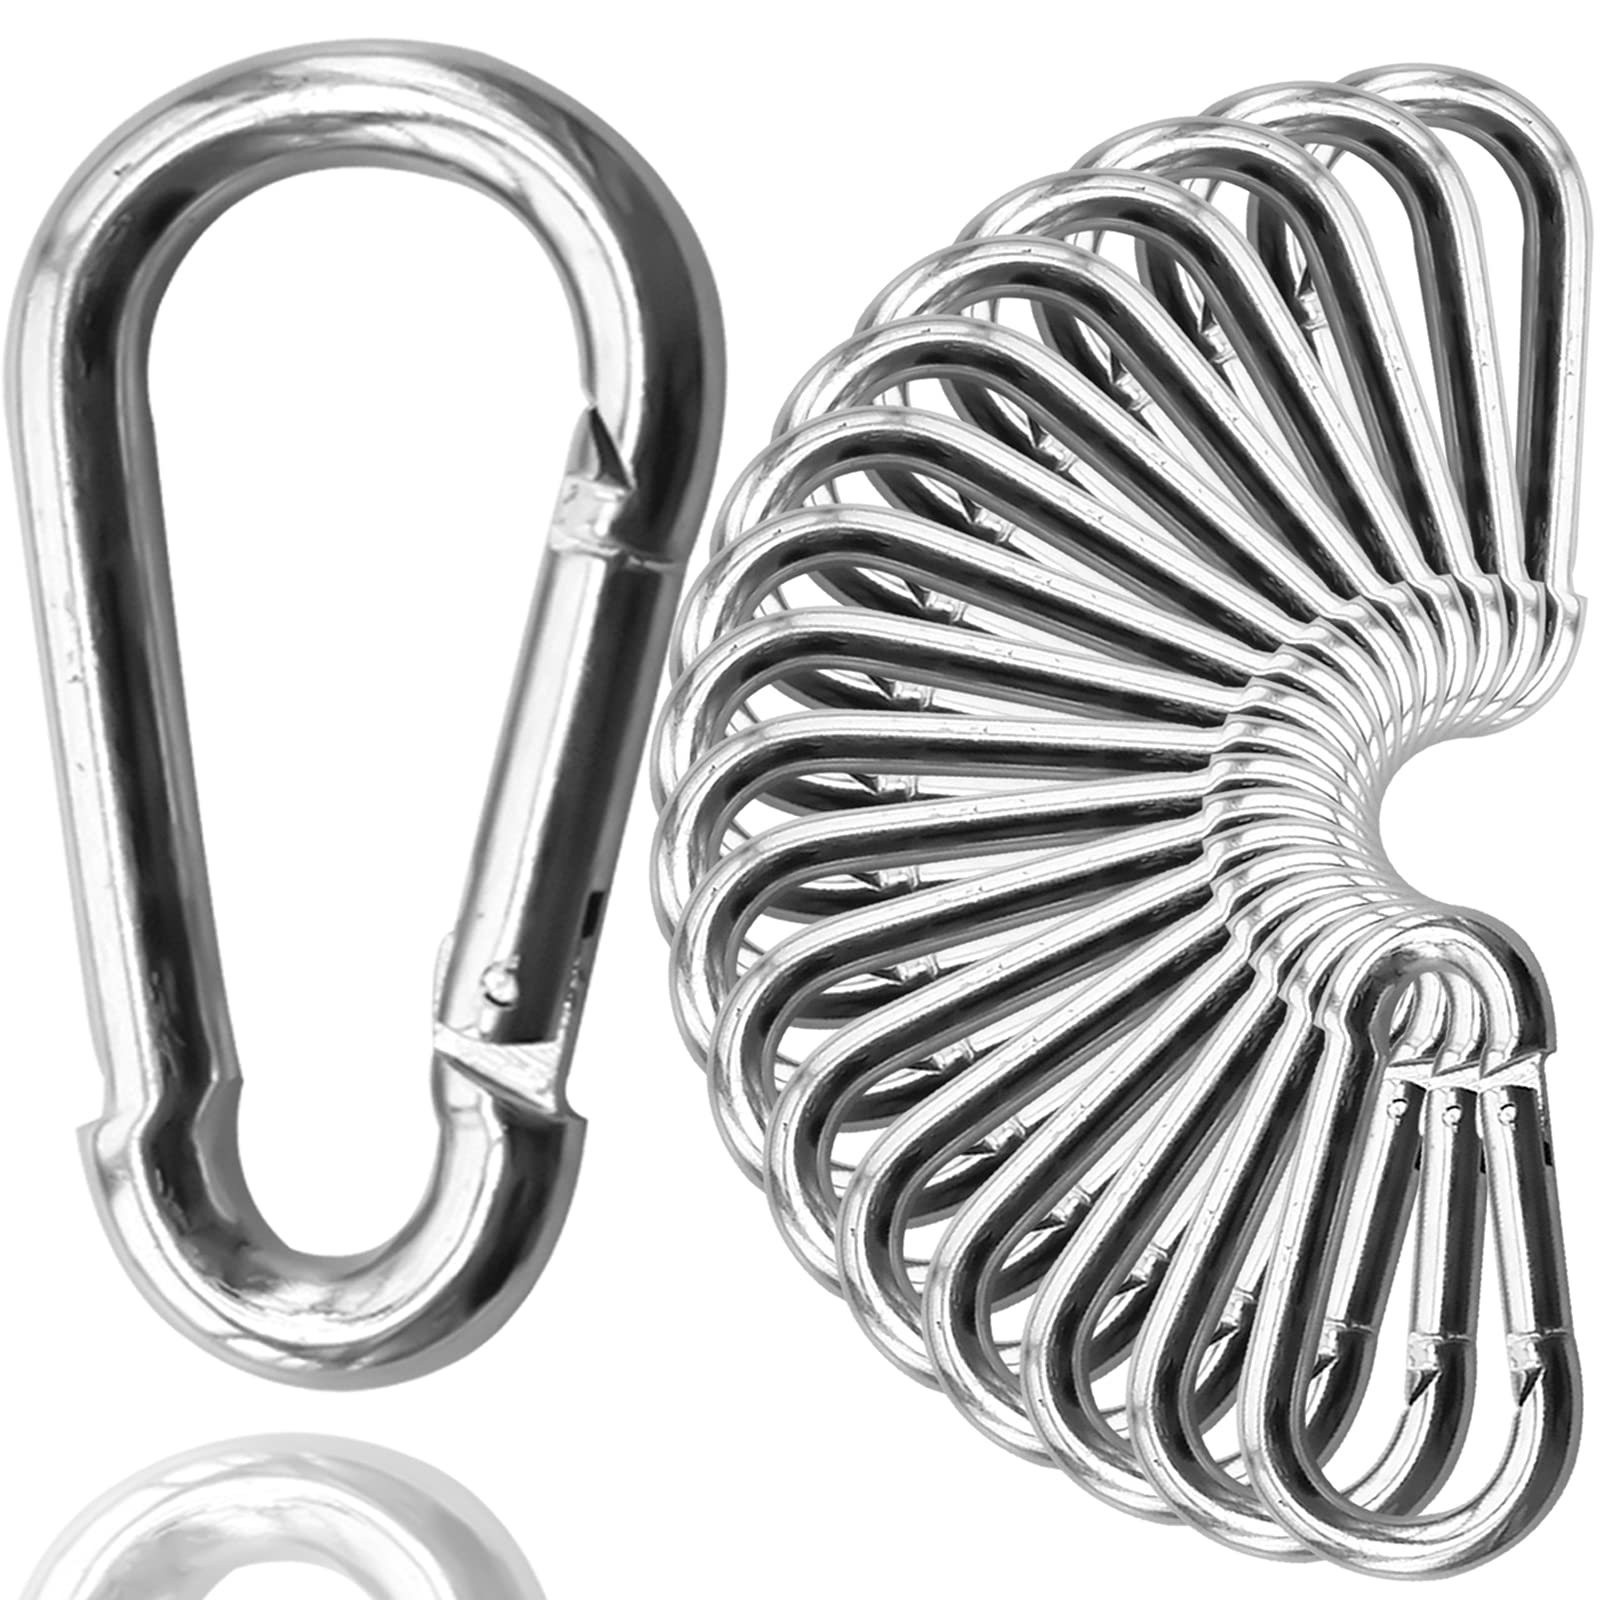 Stainless Steel Spring Clip Hook, Heavy Duty Carabiner Clips for